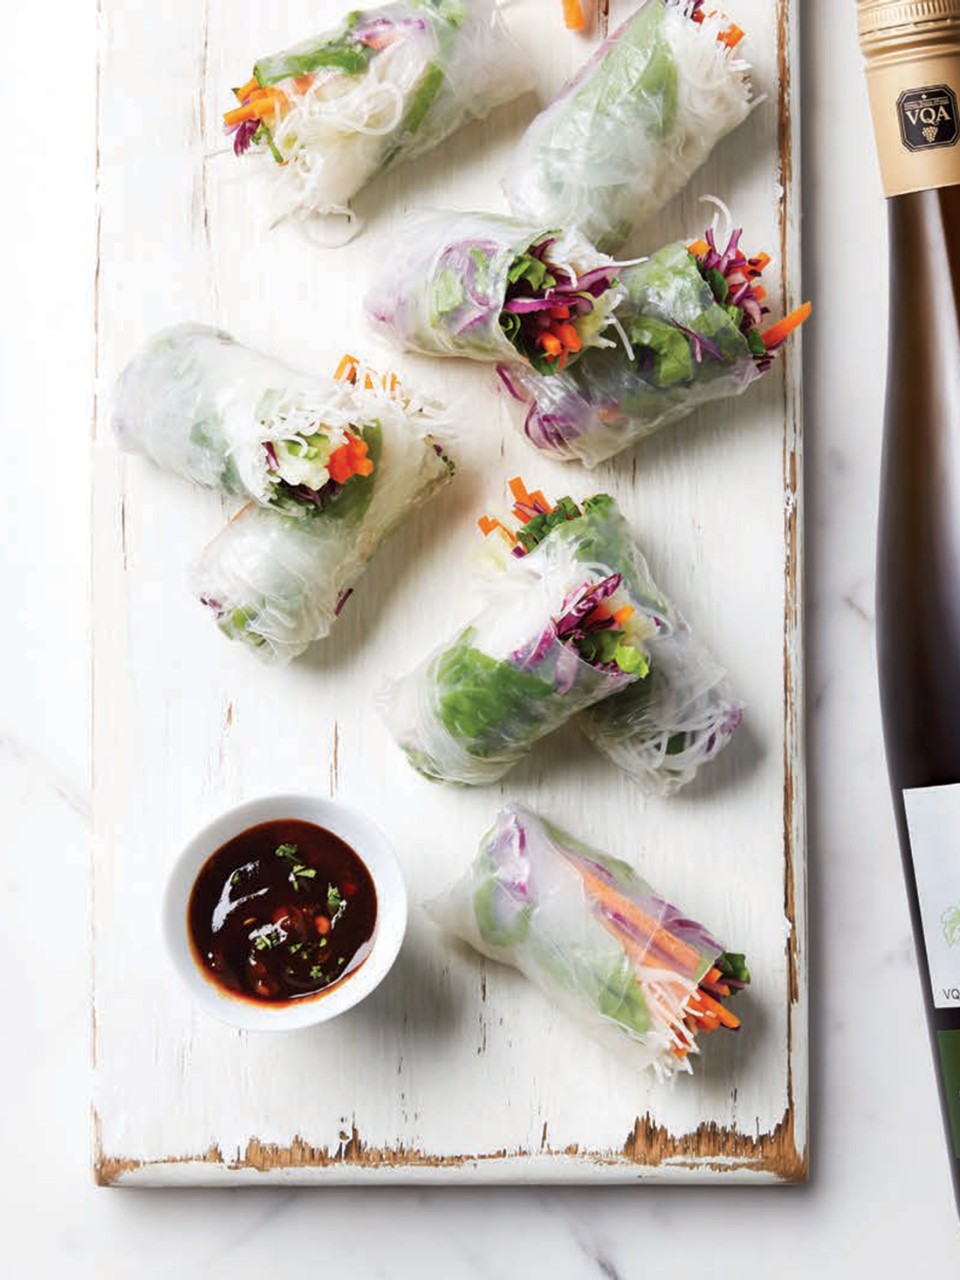 Vegetable Noodle Spring Rolls from Chili to Choc - Feasting with Friends -  Flour & Spice